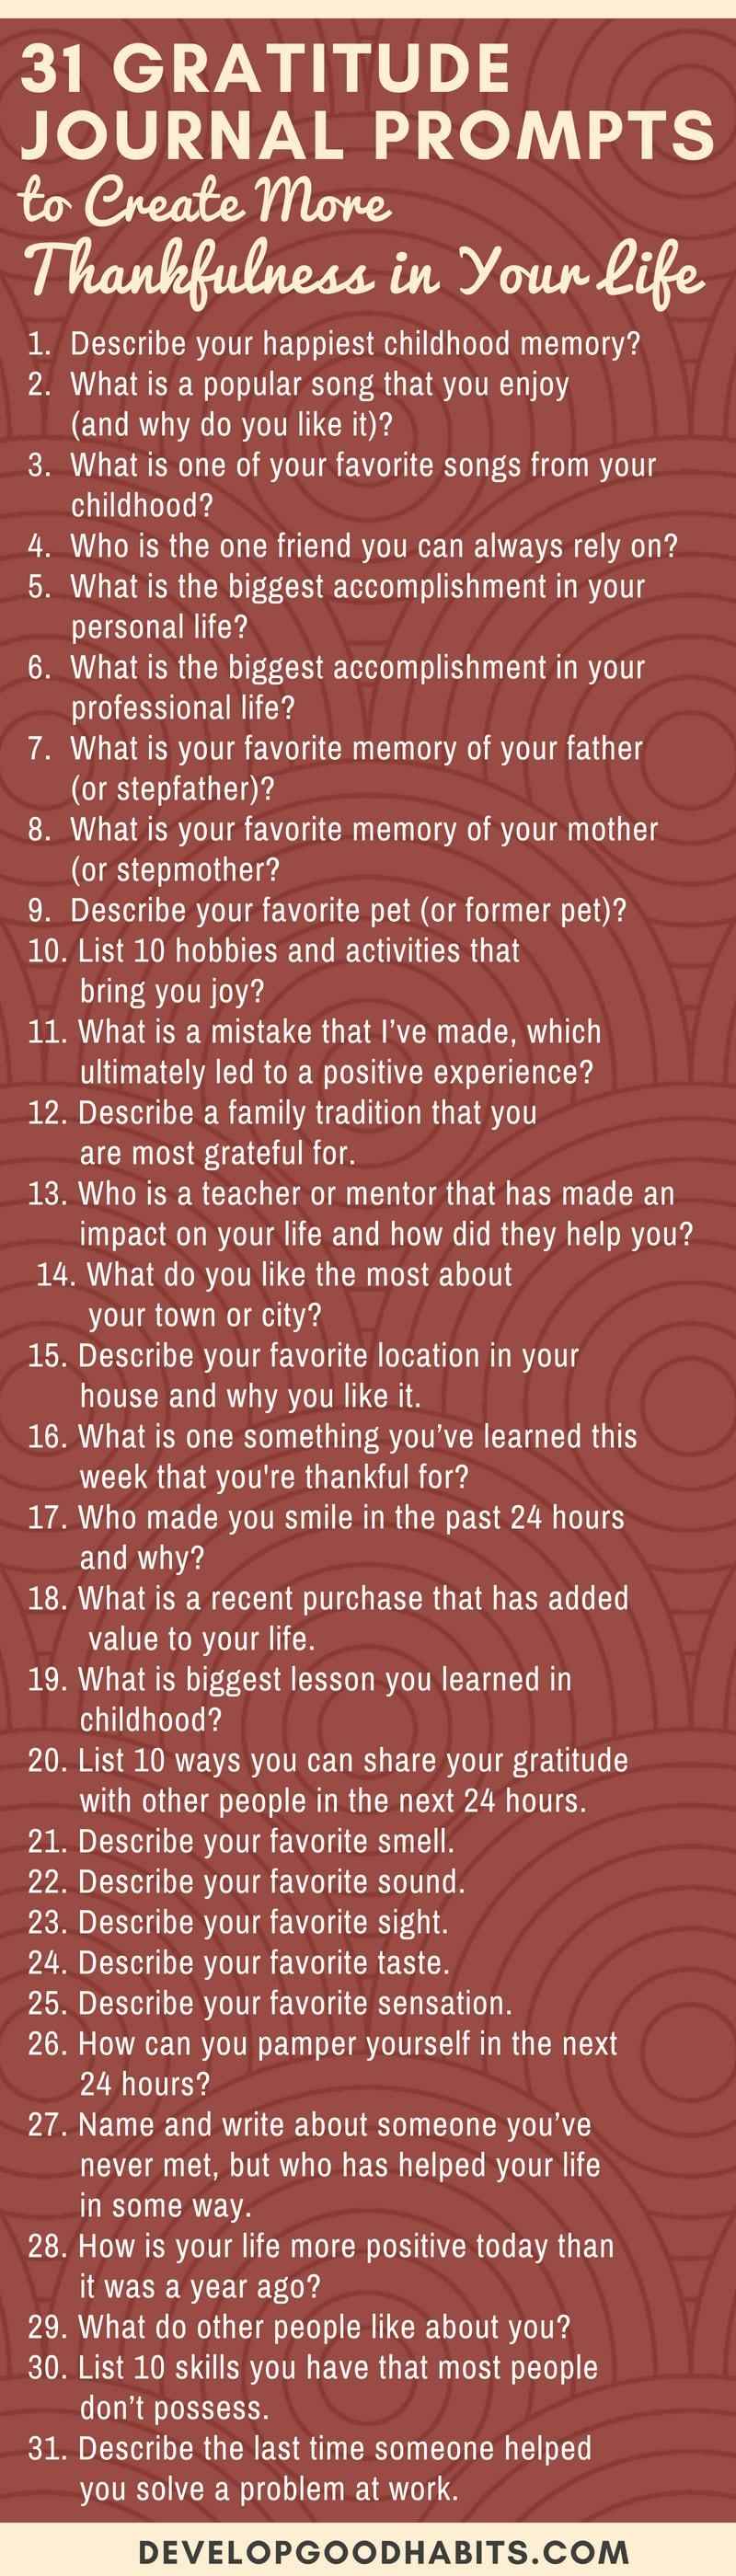 These 31 Gratitude Journal Prompts can help you start practicing gratitude to turn it into a daily habit by committing to gratitude journaling. #mindfulness #mindfulmondays #selfcare #selfhelp #selflove #inspiration #motivation #wellness #healthyhabits #infographic